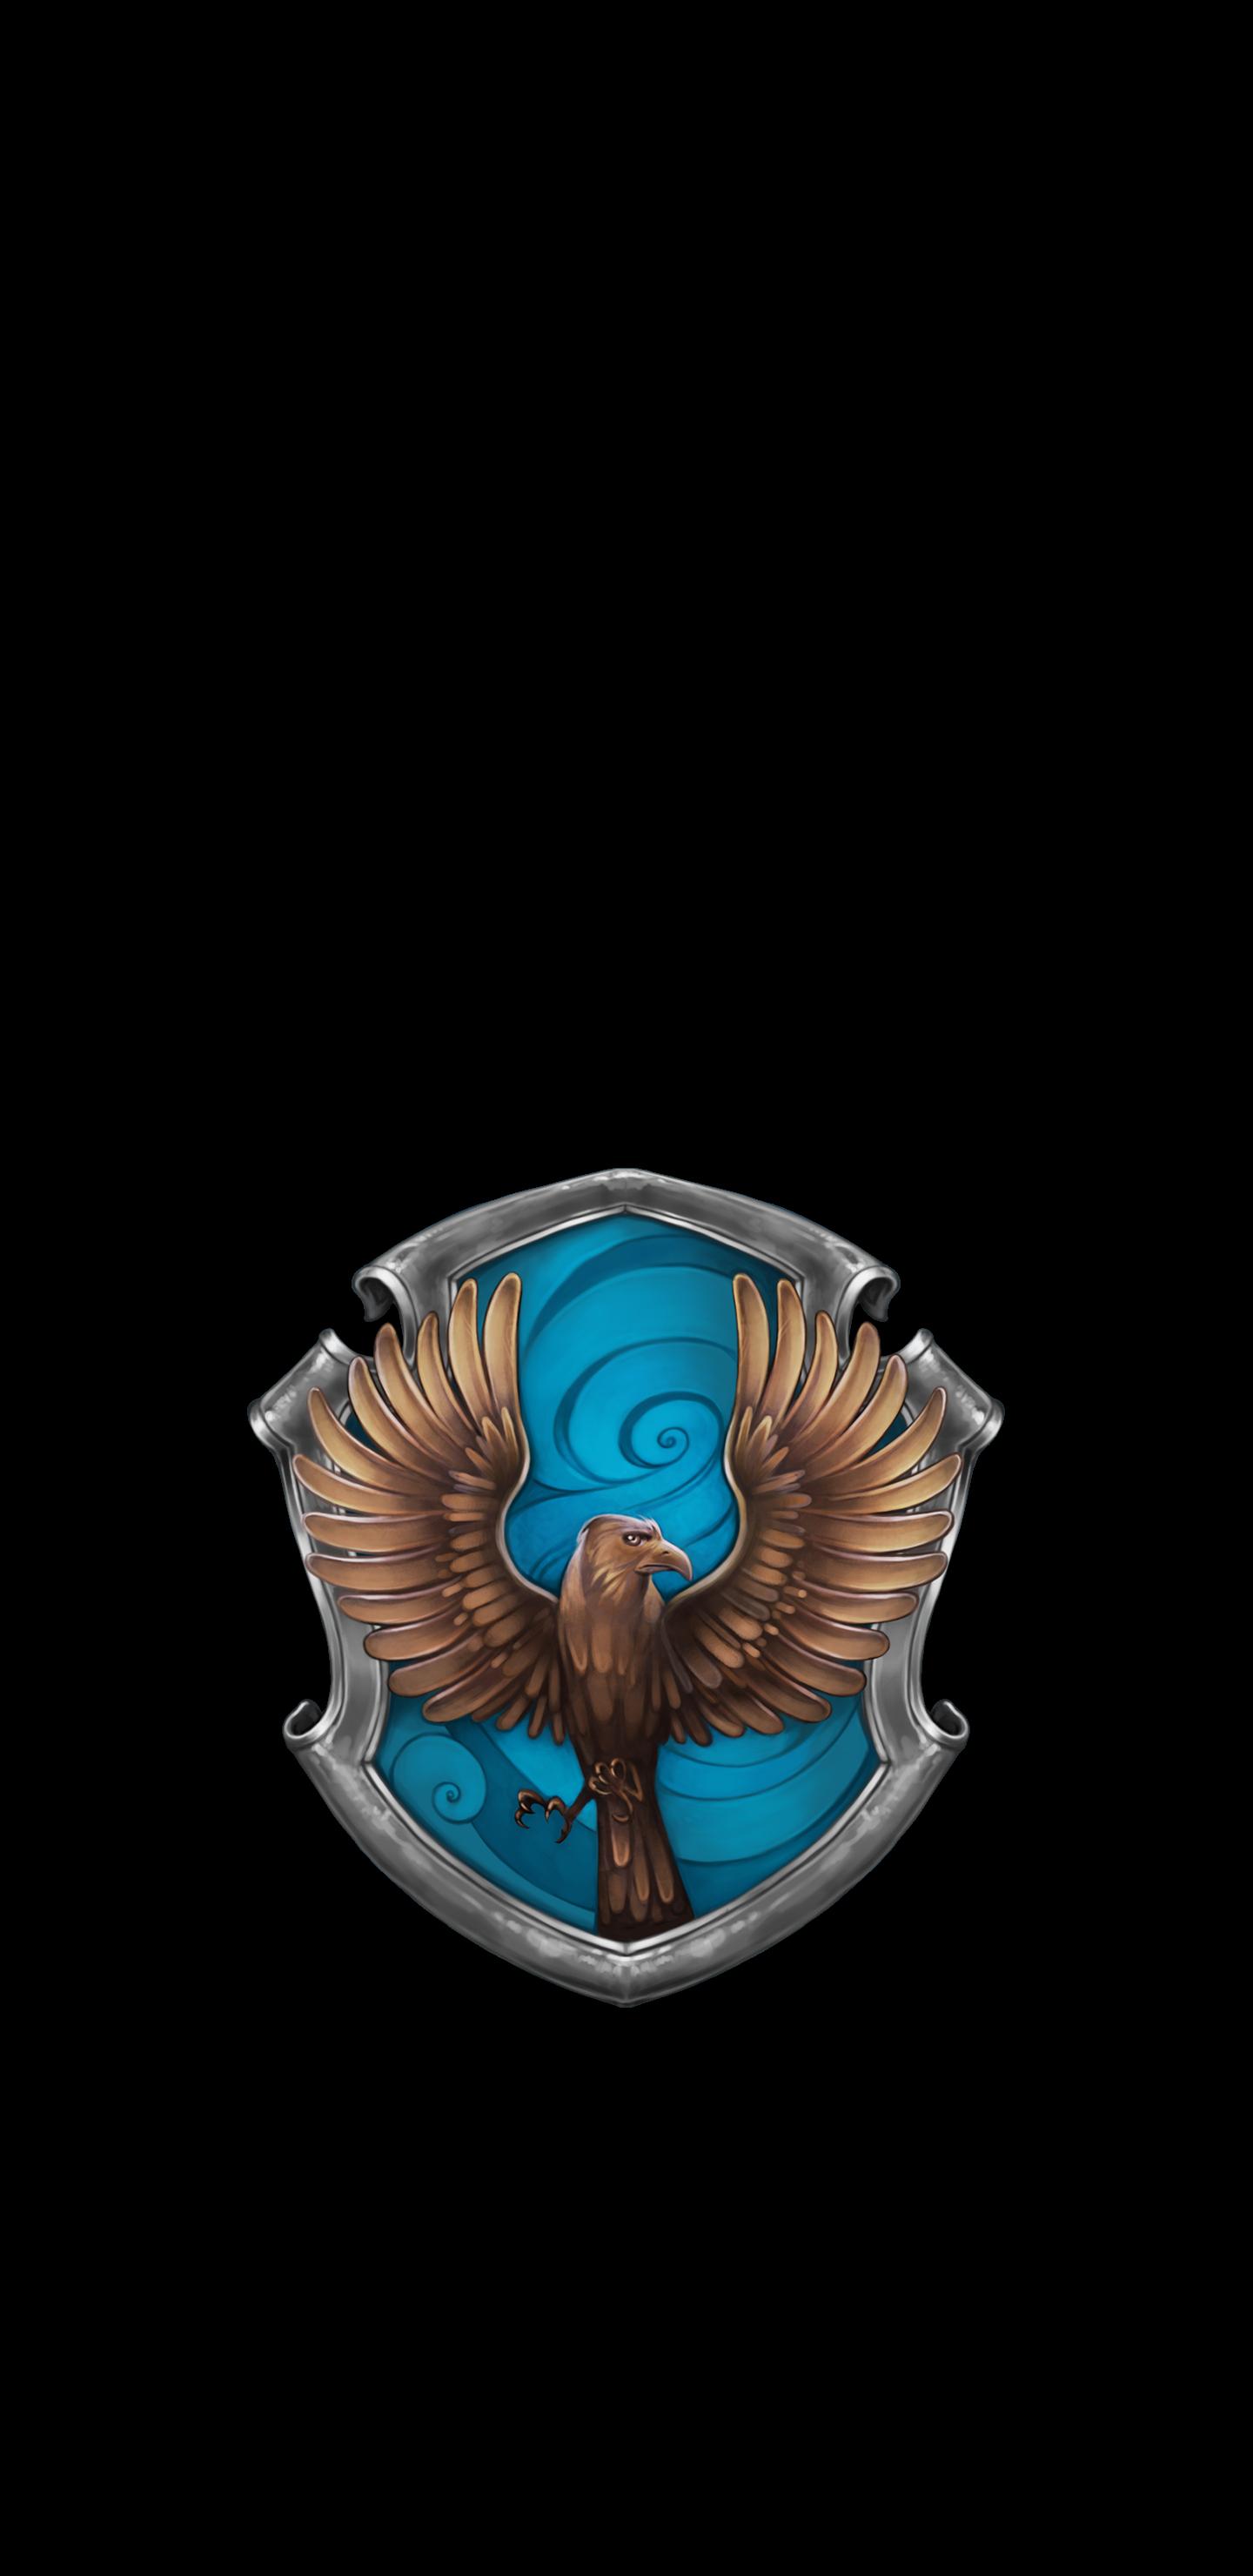 Ravenclaw & Slytherin house crest AMOLED wallpaper for mobile phones [1440x2960]